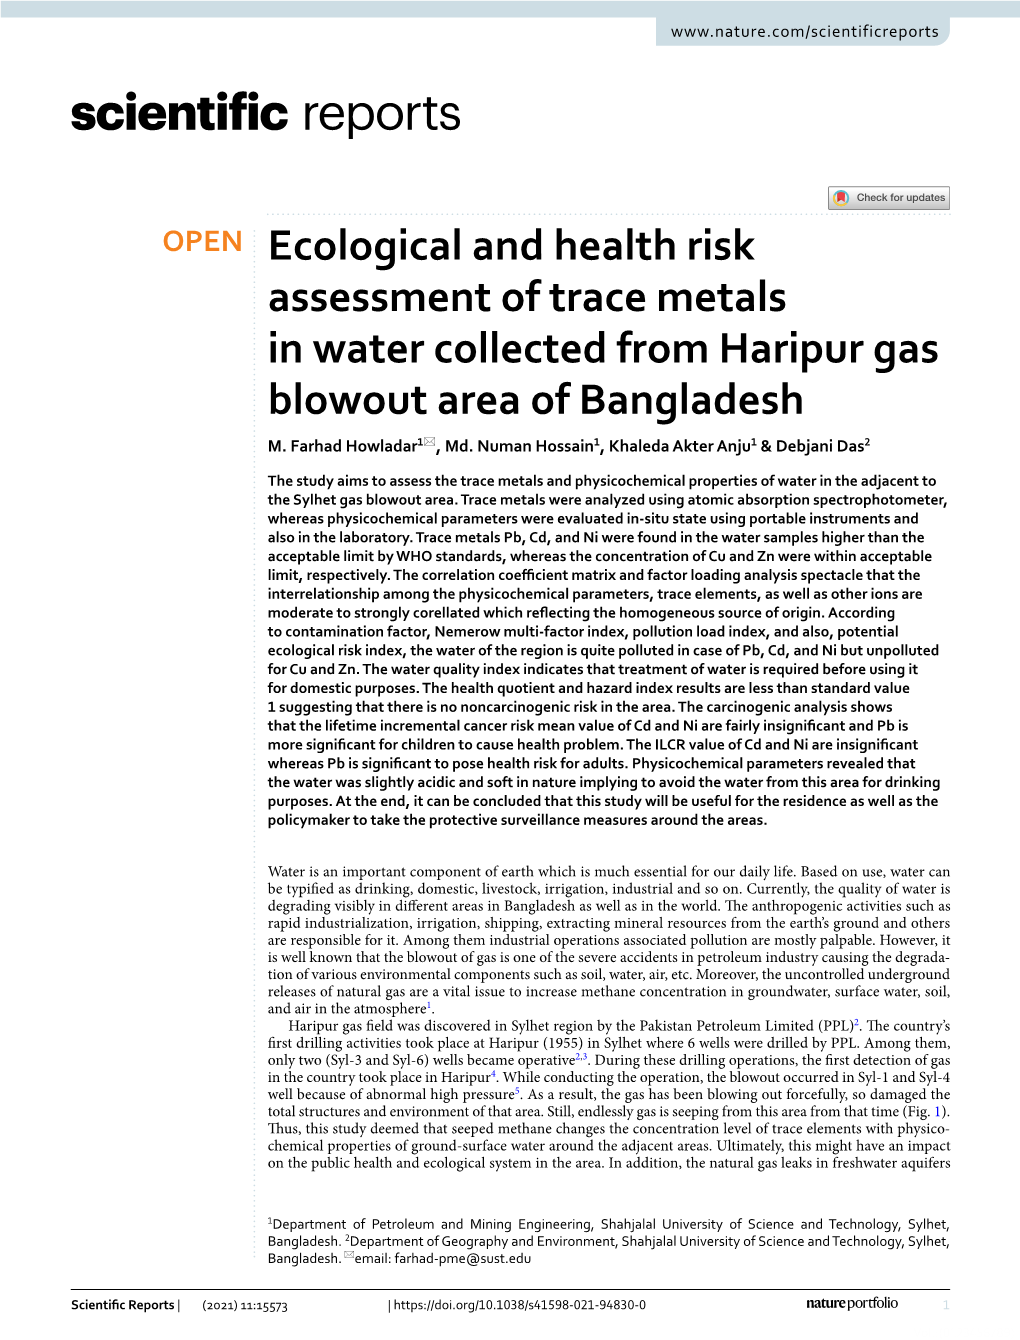 Ecological and Health Risk Assessment of Trace Metals in Water Collected from Haripur Gas Blowout Area of Bangladesh M